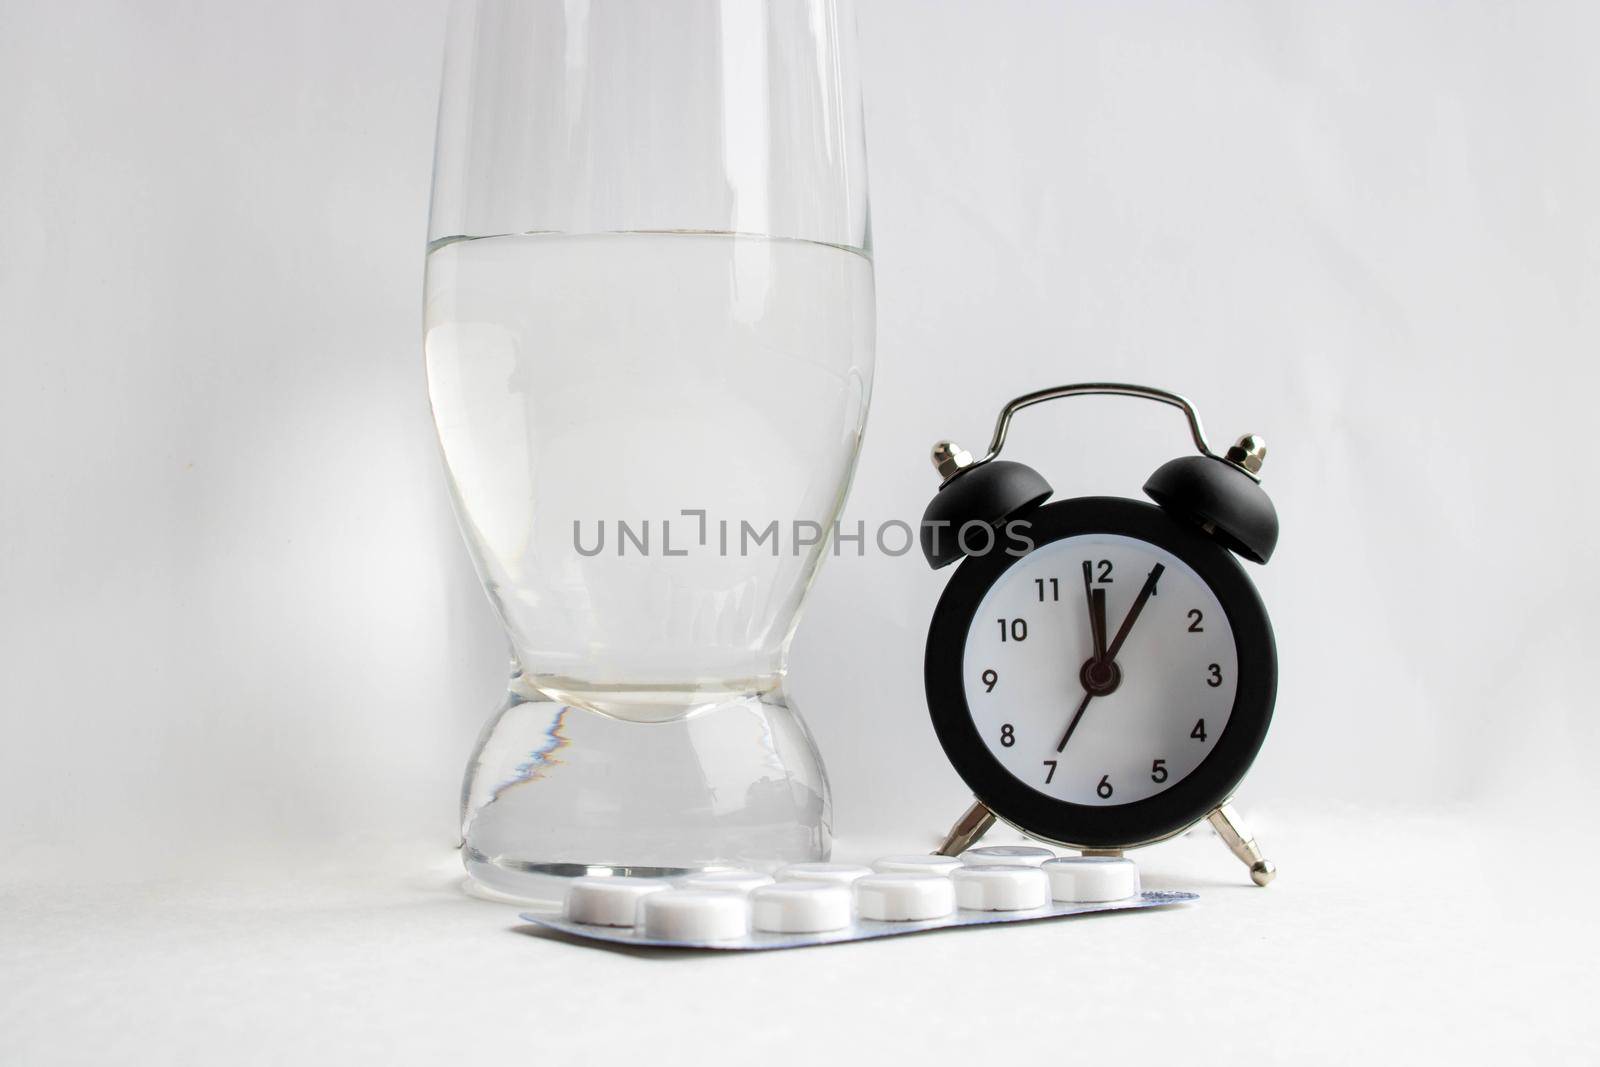 Medical tablets and a glass of water next to the clock on a white background by lapushka62